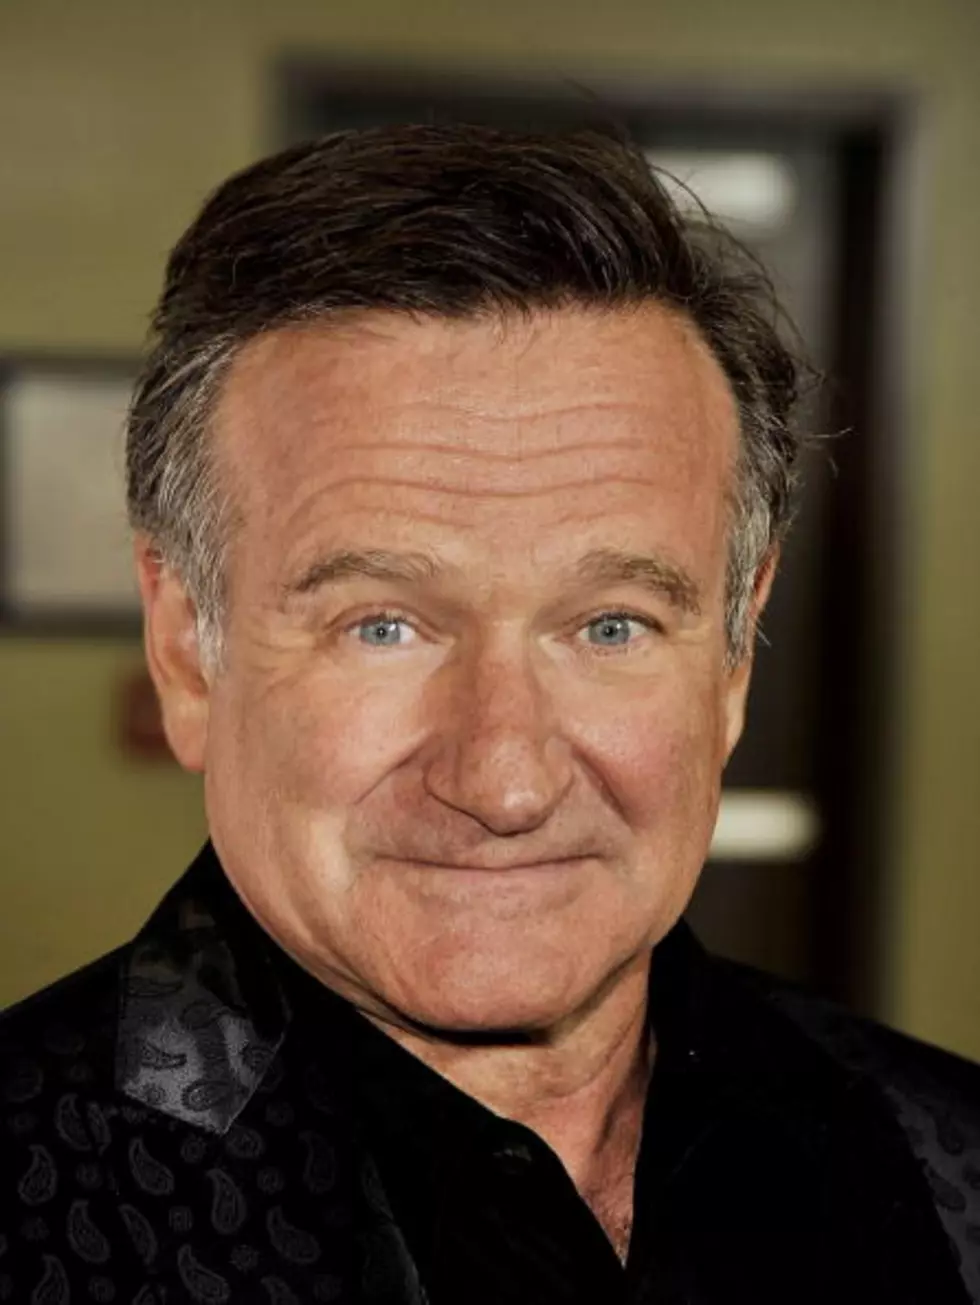 New Robin Williams Mural in Chicago Promotes Suicide Awareness